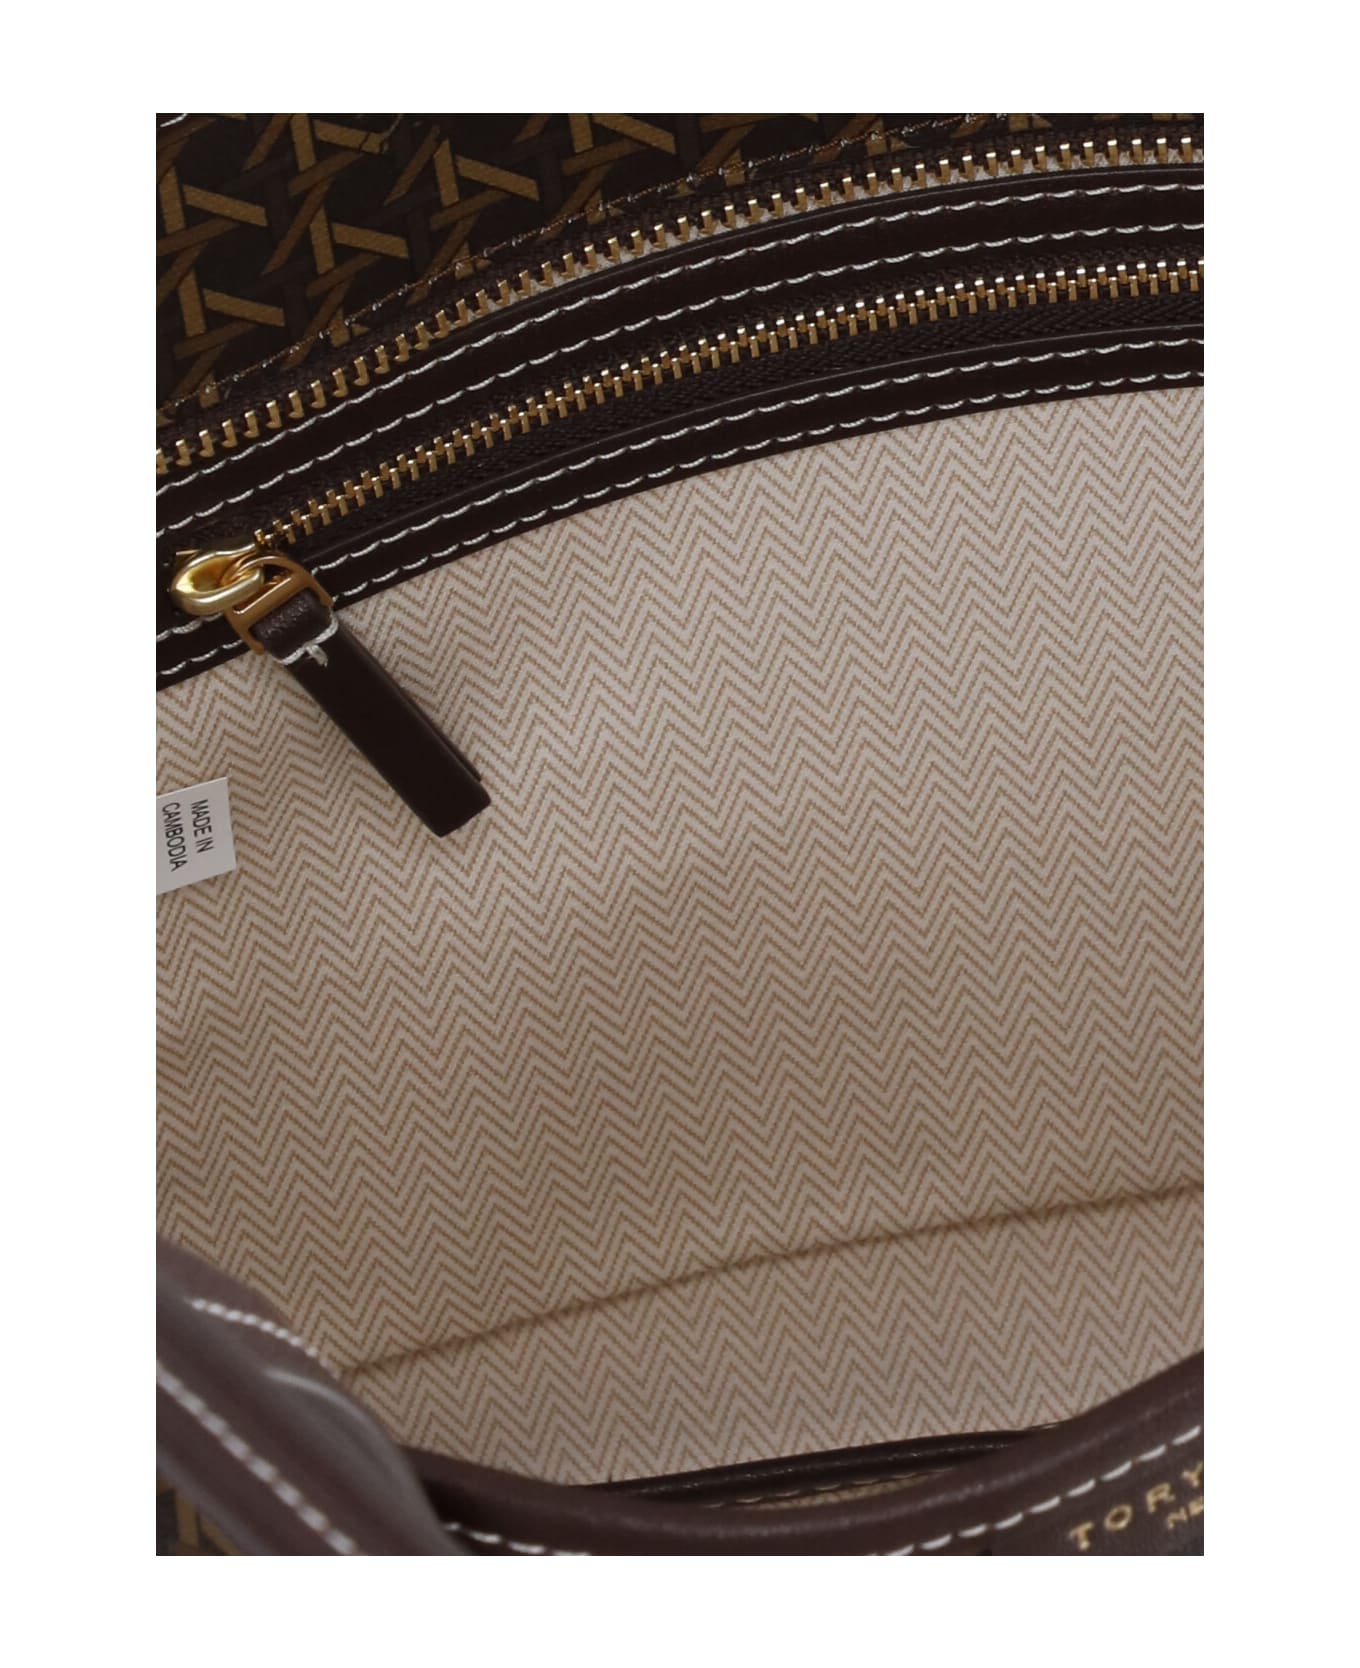 Tory Burch Ever-ready Tote Bag - Brown